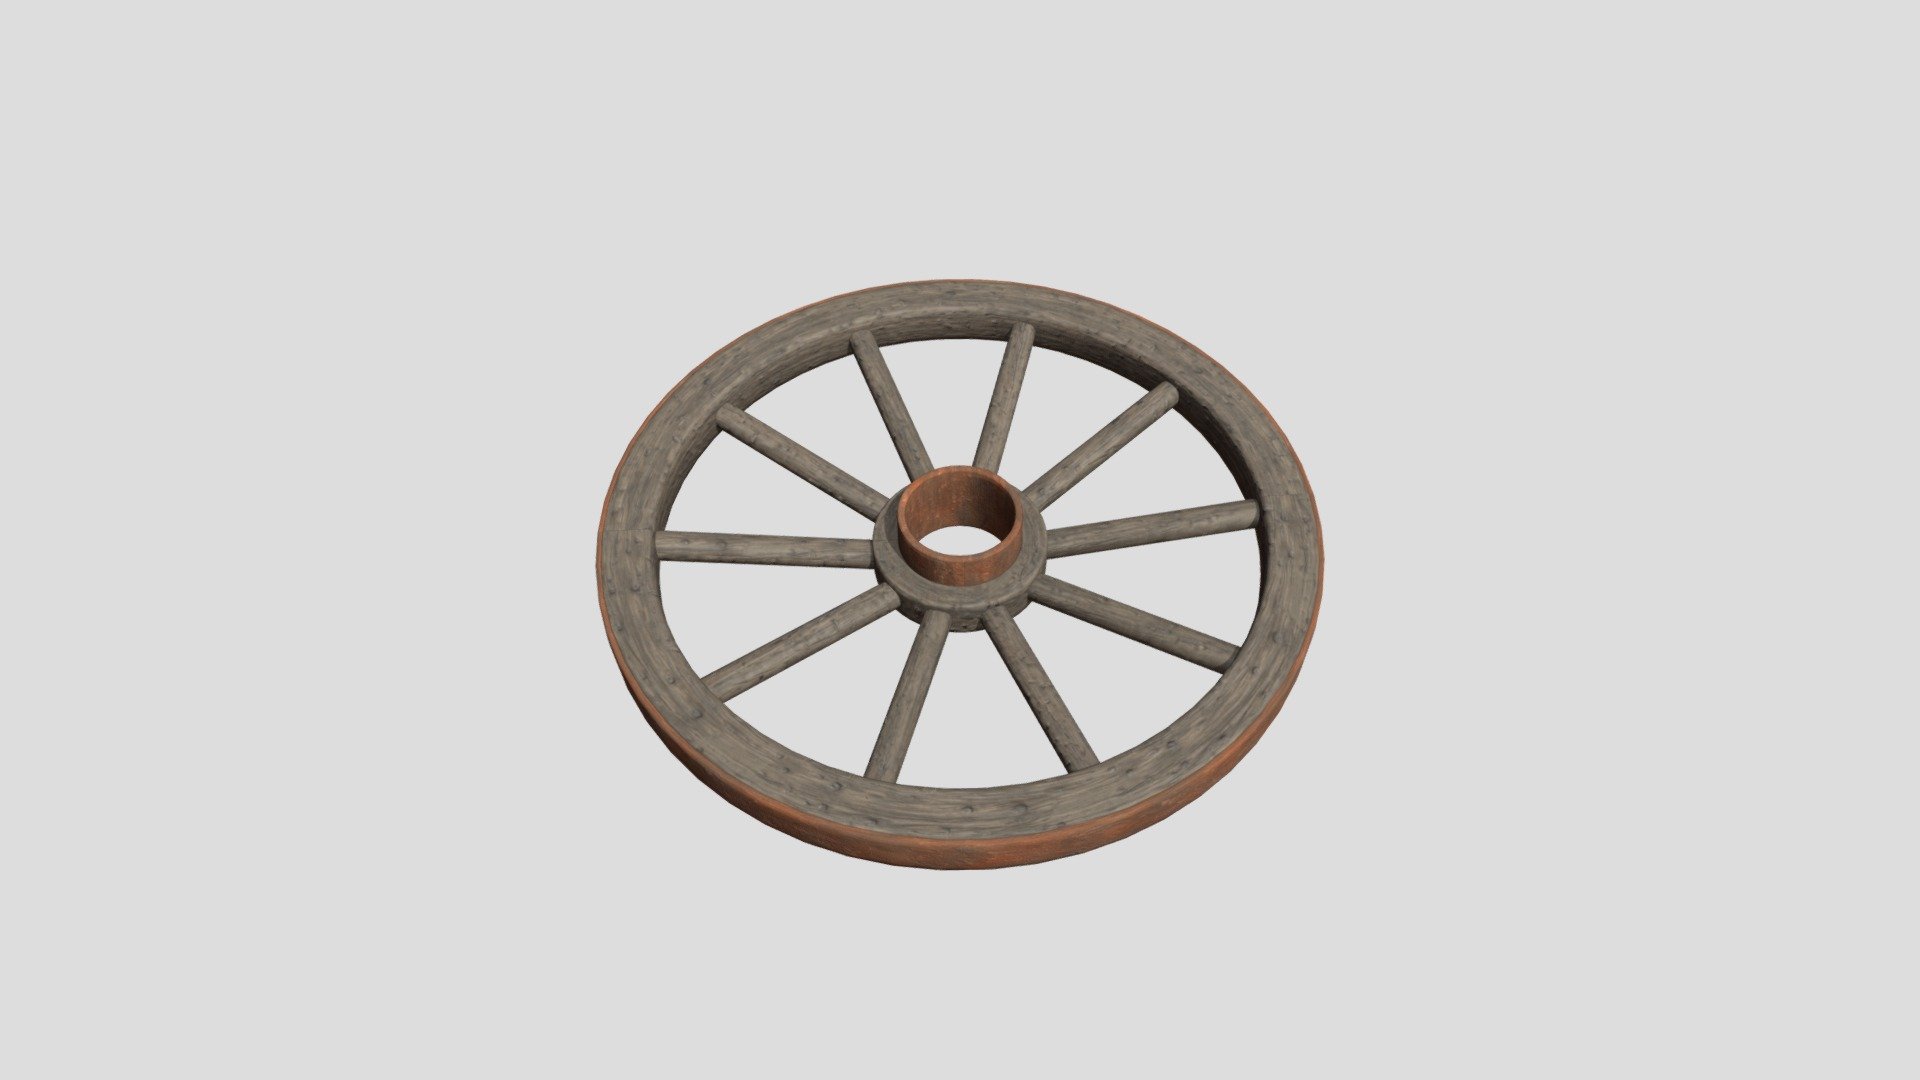 Hi all,

This is PBR cart wheel. The file includes a model in real world scale (91cm x 91cm x 11cm). It comes in following formats:

.blend

.fbx

.obj

.dae

The blender file has the shaders set up, so it's ready to render using Cycles.

It also comes with set of 4K .png maps:

base color

roughness

ambient occlusion

normal - Cart Wheel - Buy Royalty Free 3D model by kambur 3d model